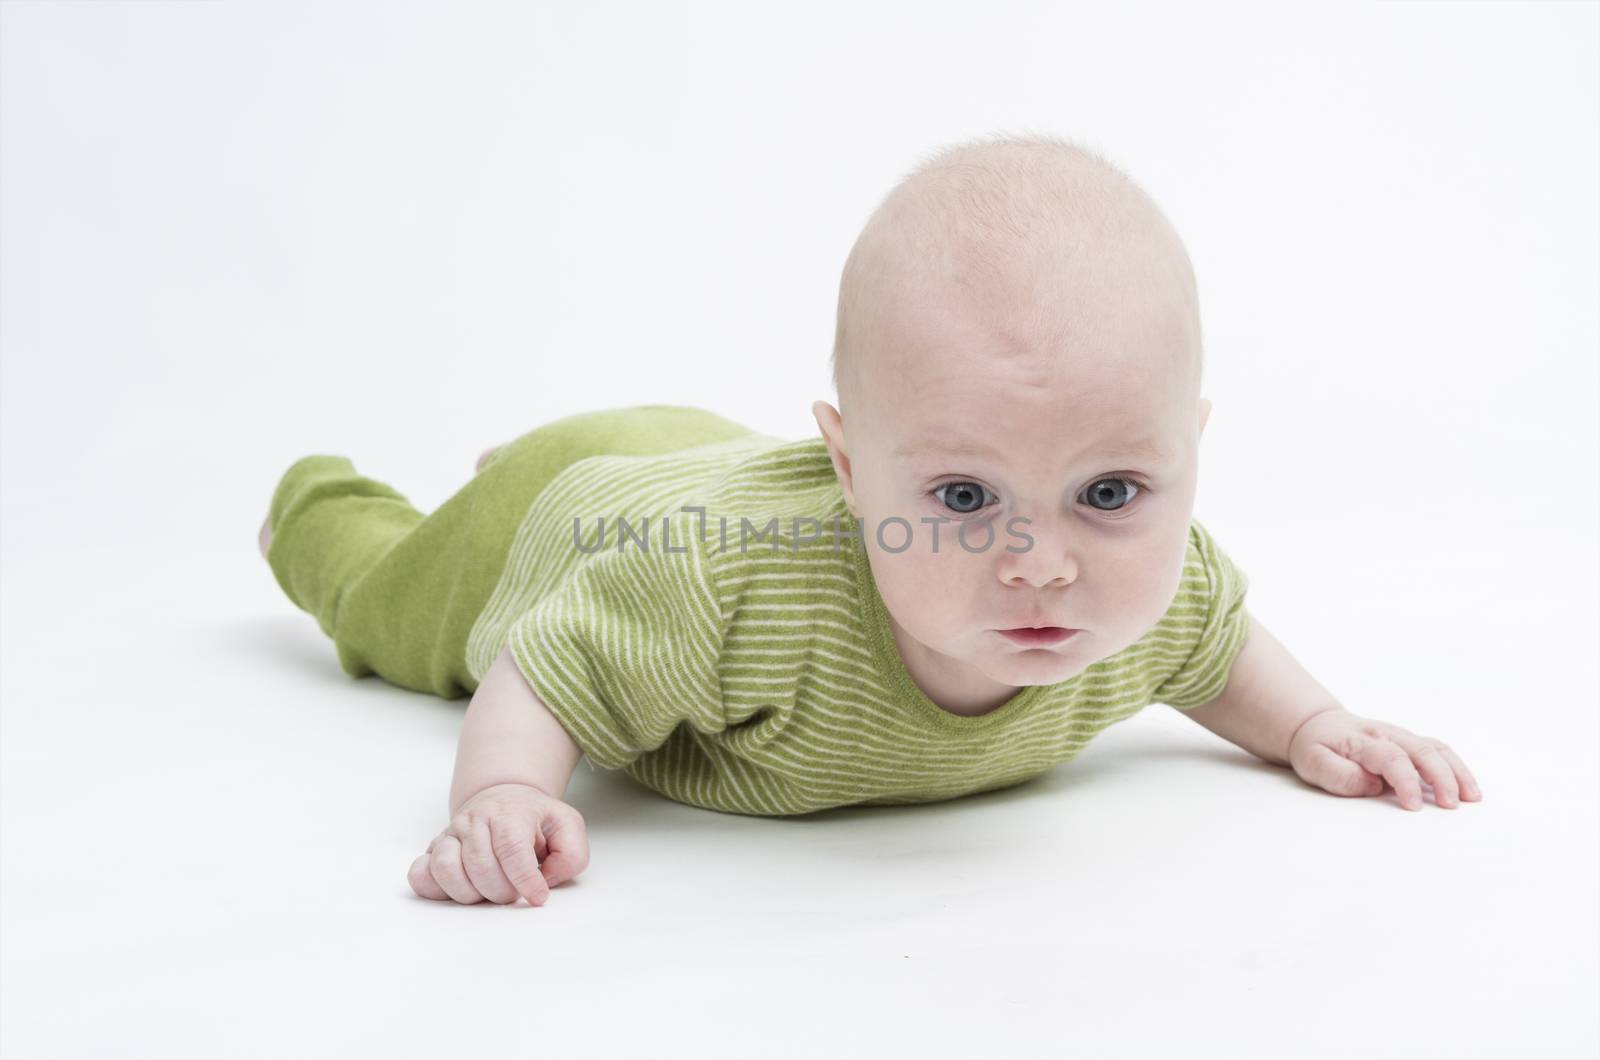 crawling baby in green romper suit isolated on white background. studio shot